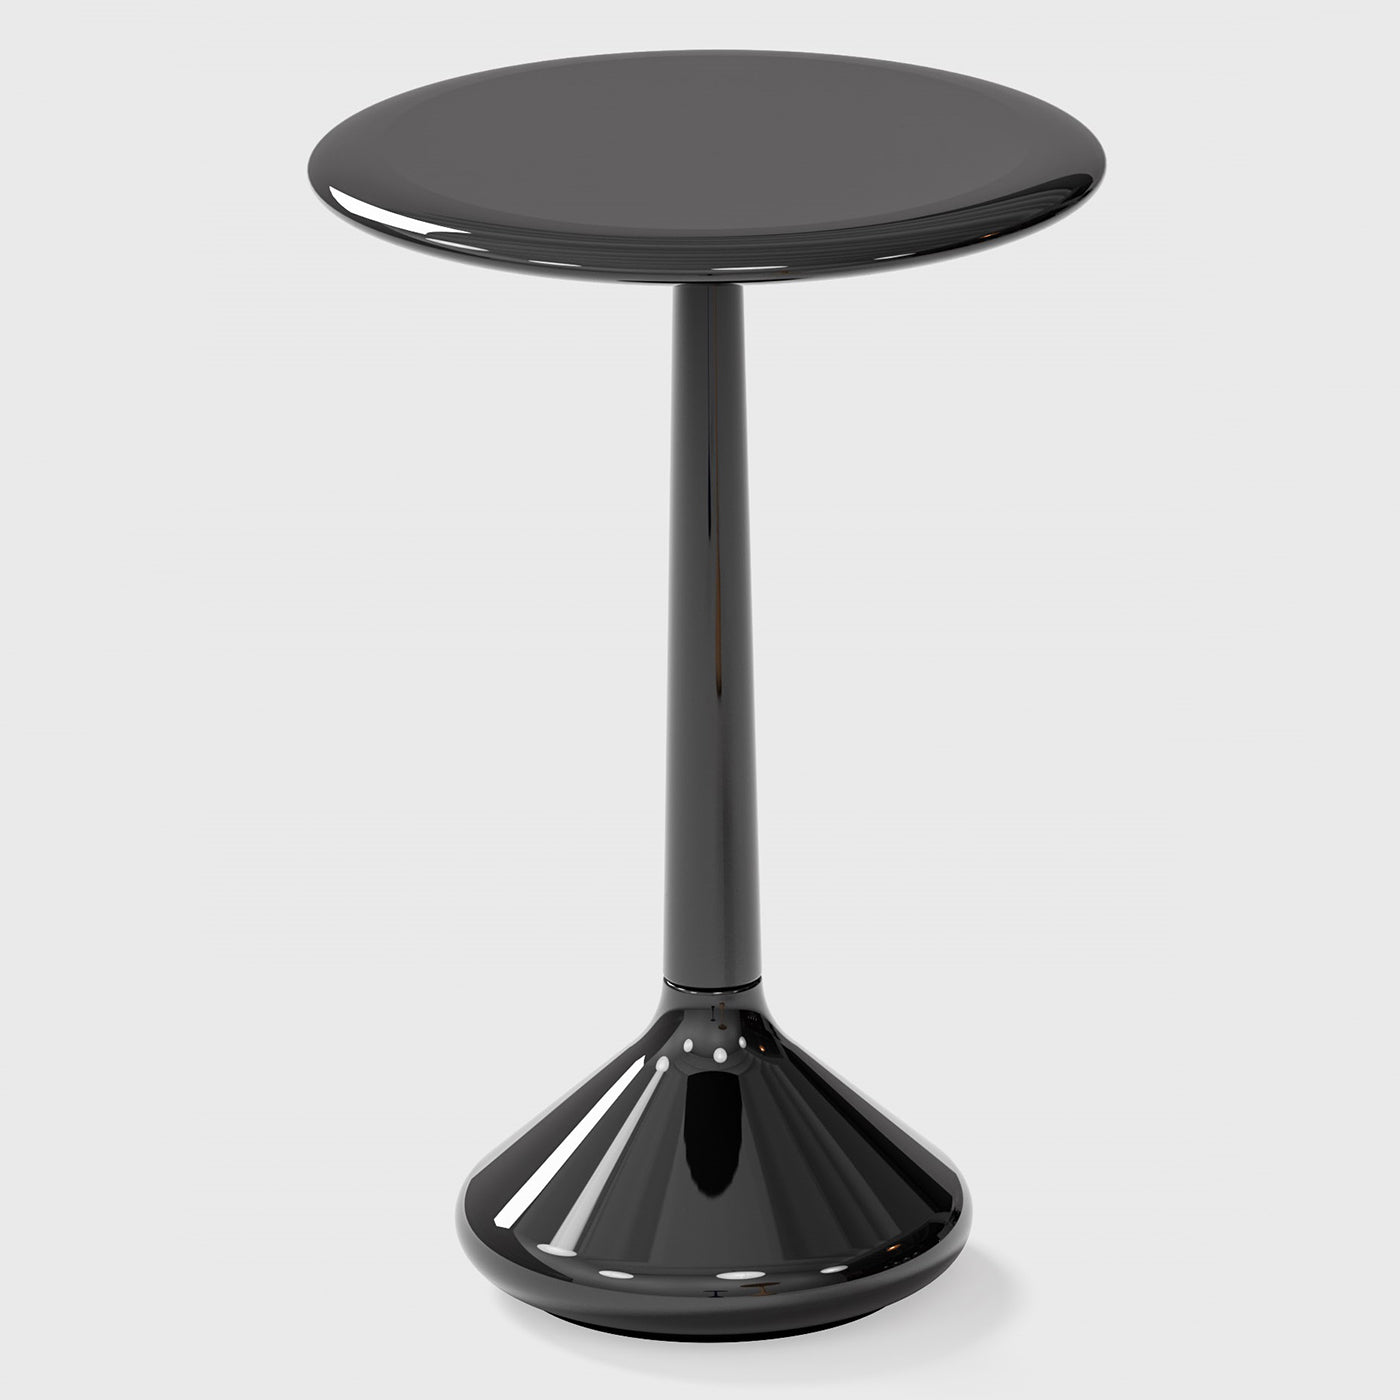 Glossy Laquered Black Side Table - Alternative view 1